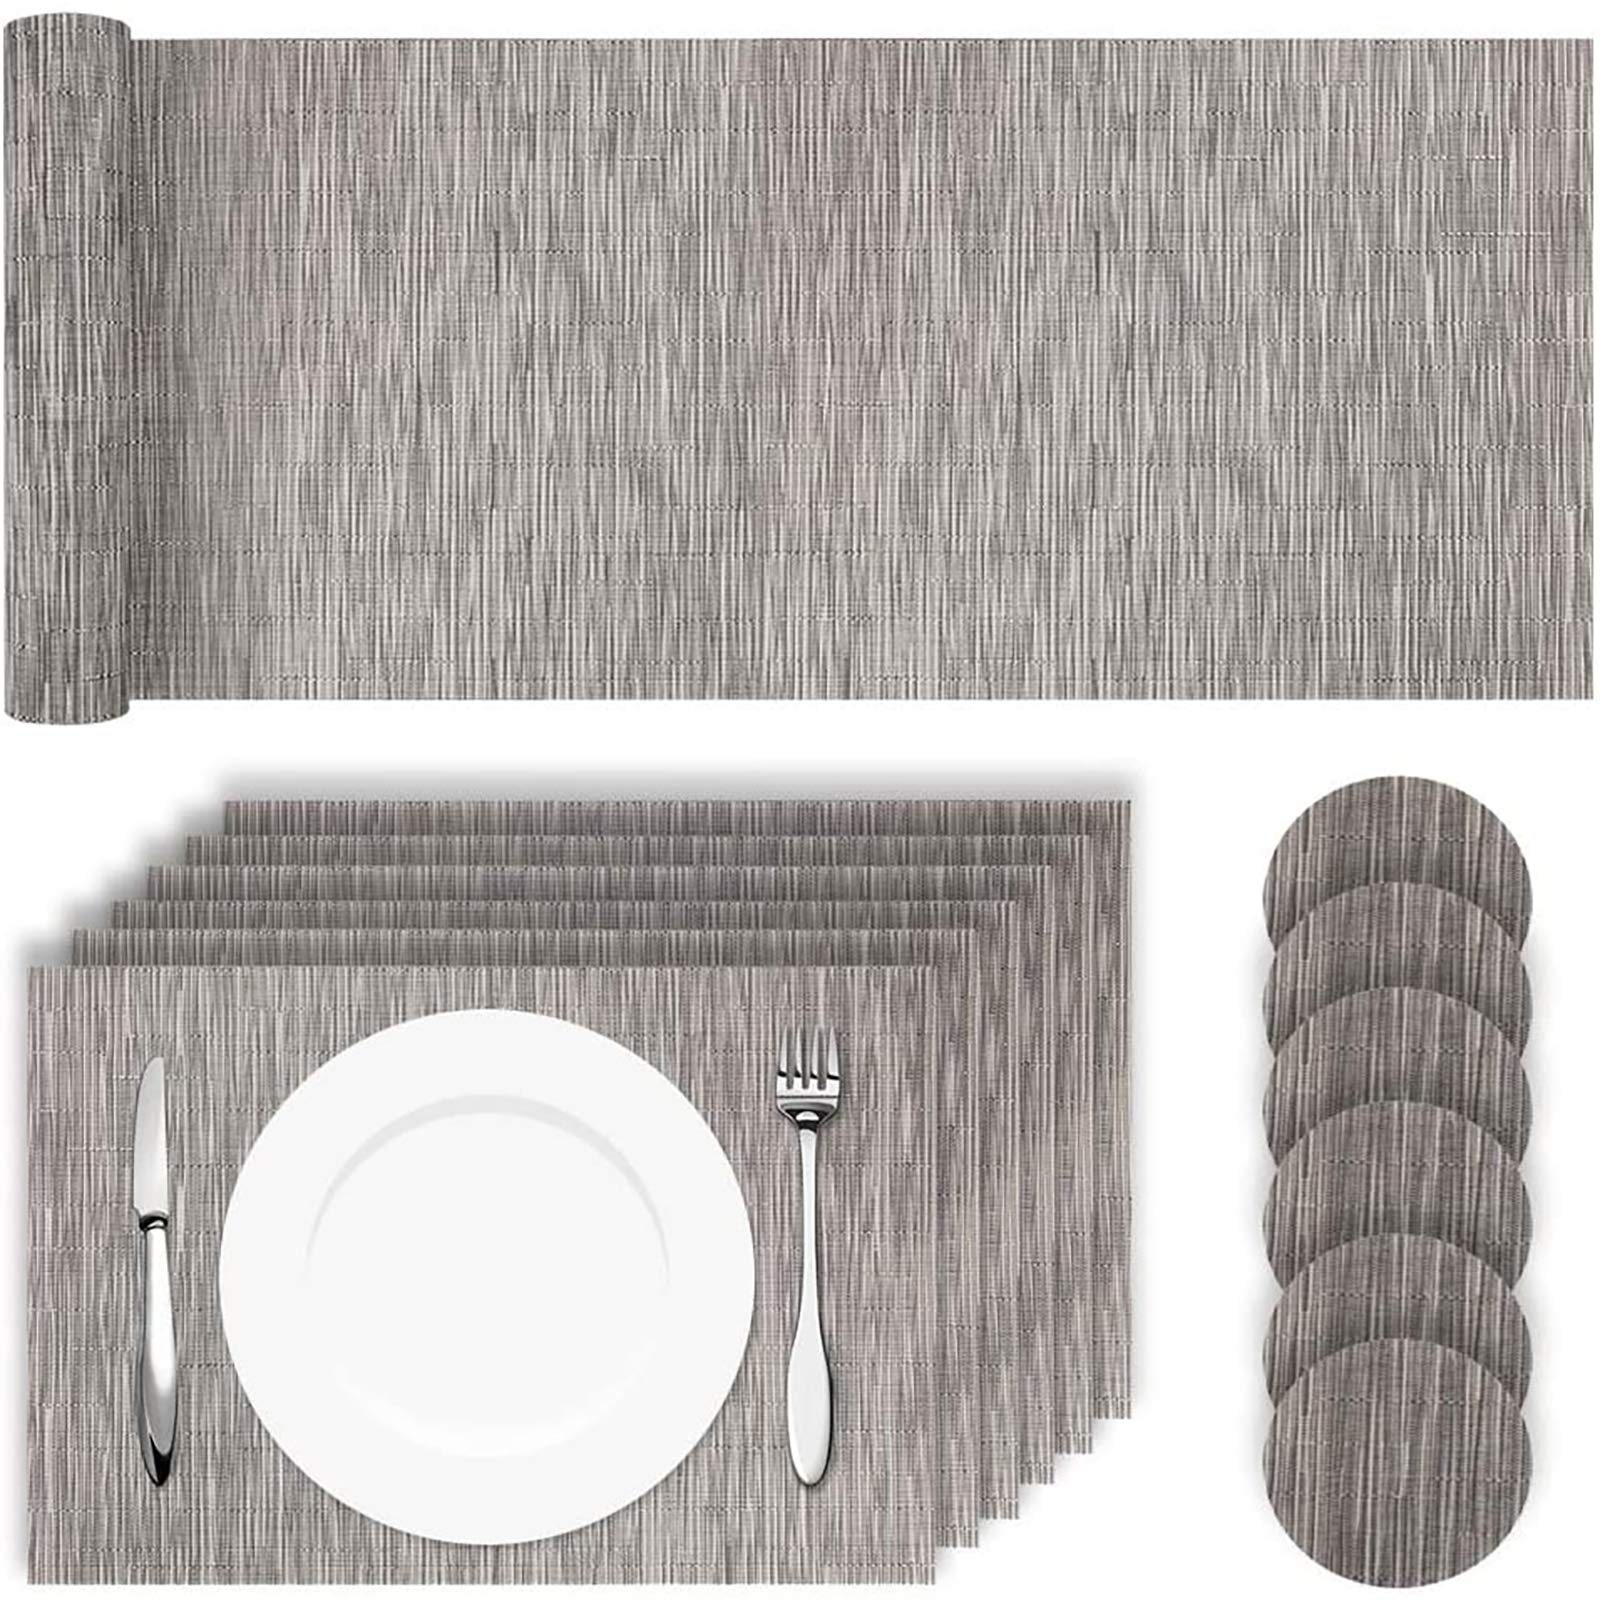 HEYOMART Placemats Table Mats Set with 6 x Placemats + 6 x Coasters + 1 x Long Table Mat Resistant Anti Slip Table Place Mats and Coaster Sets for Home Restaurant, Grey